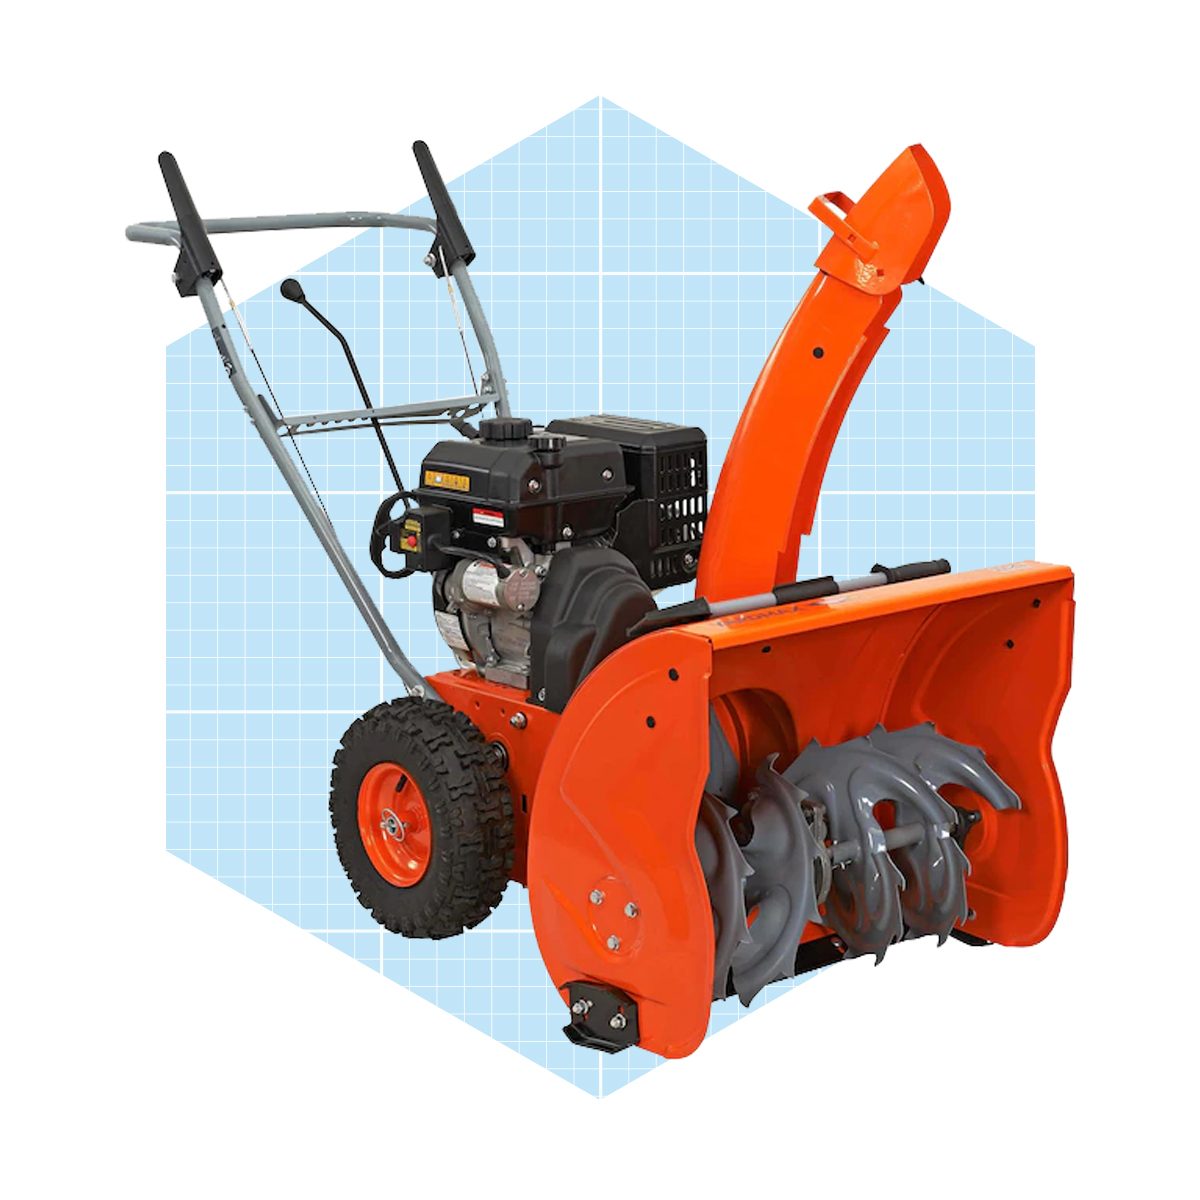 Yardmax 24 In 208 Cu Cm Two Stage Self Propelled Gas Snow Blower With Push Button Electric Start Ecomm Lowes.com